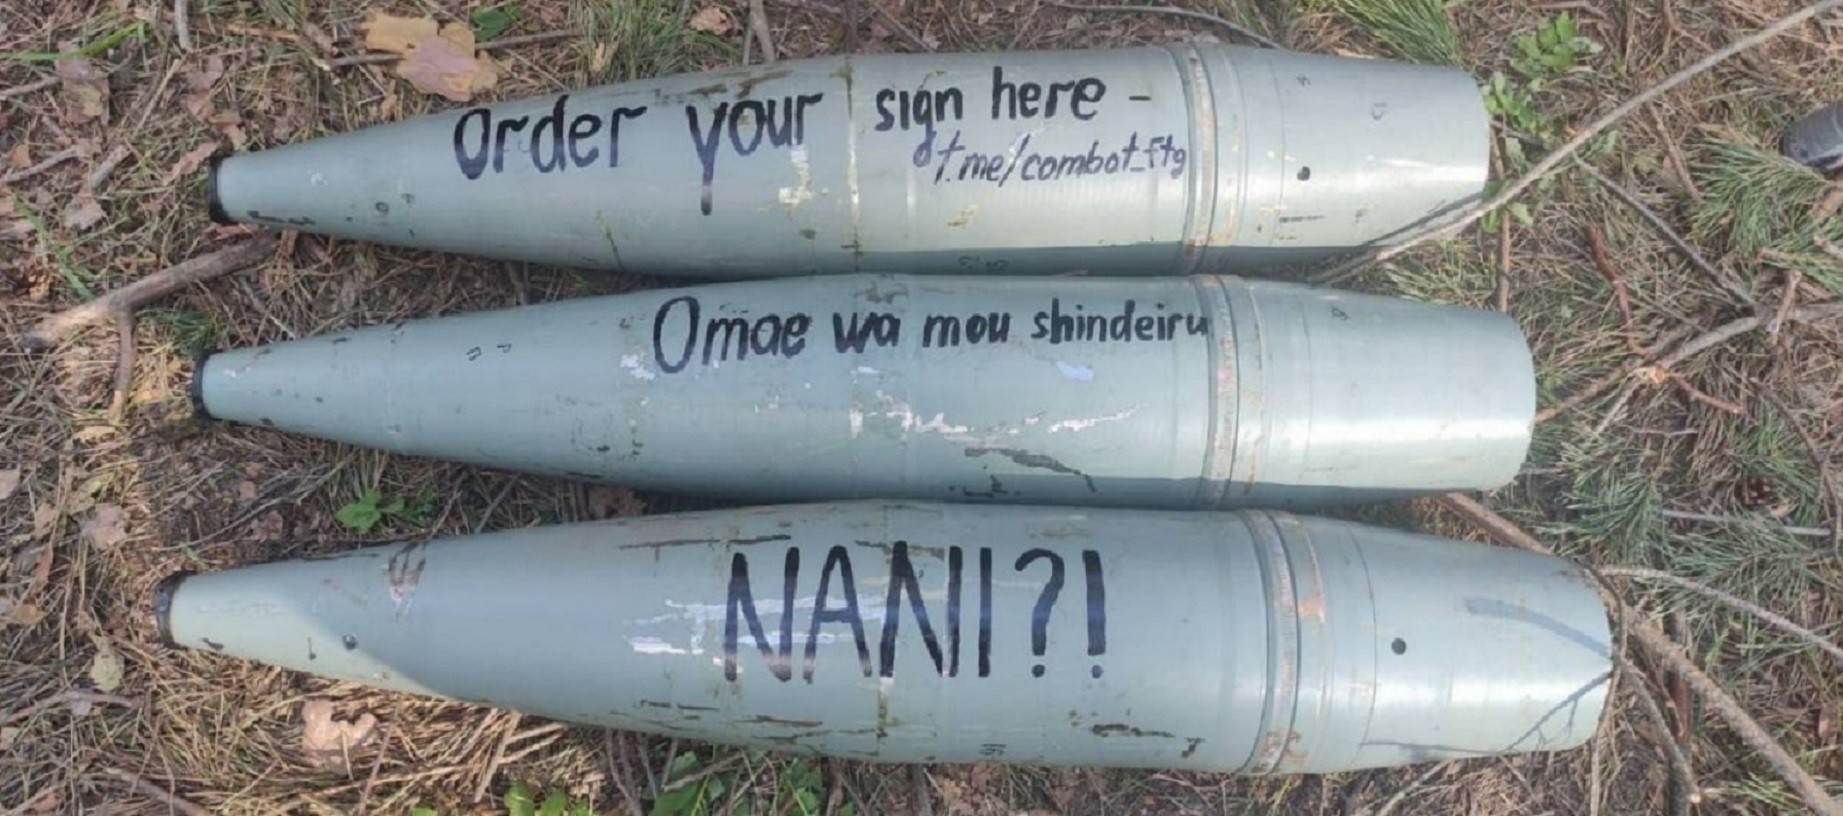 Ukrainians Are Paying to Paint Personal Messages on Artillery Shells - The  New York Times